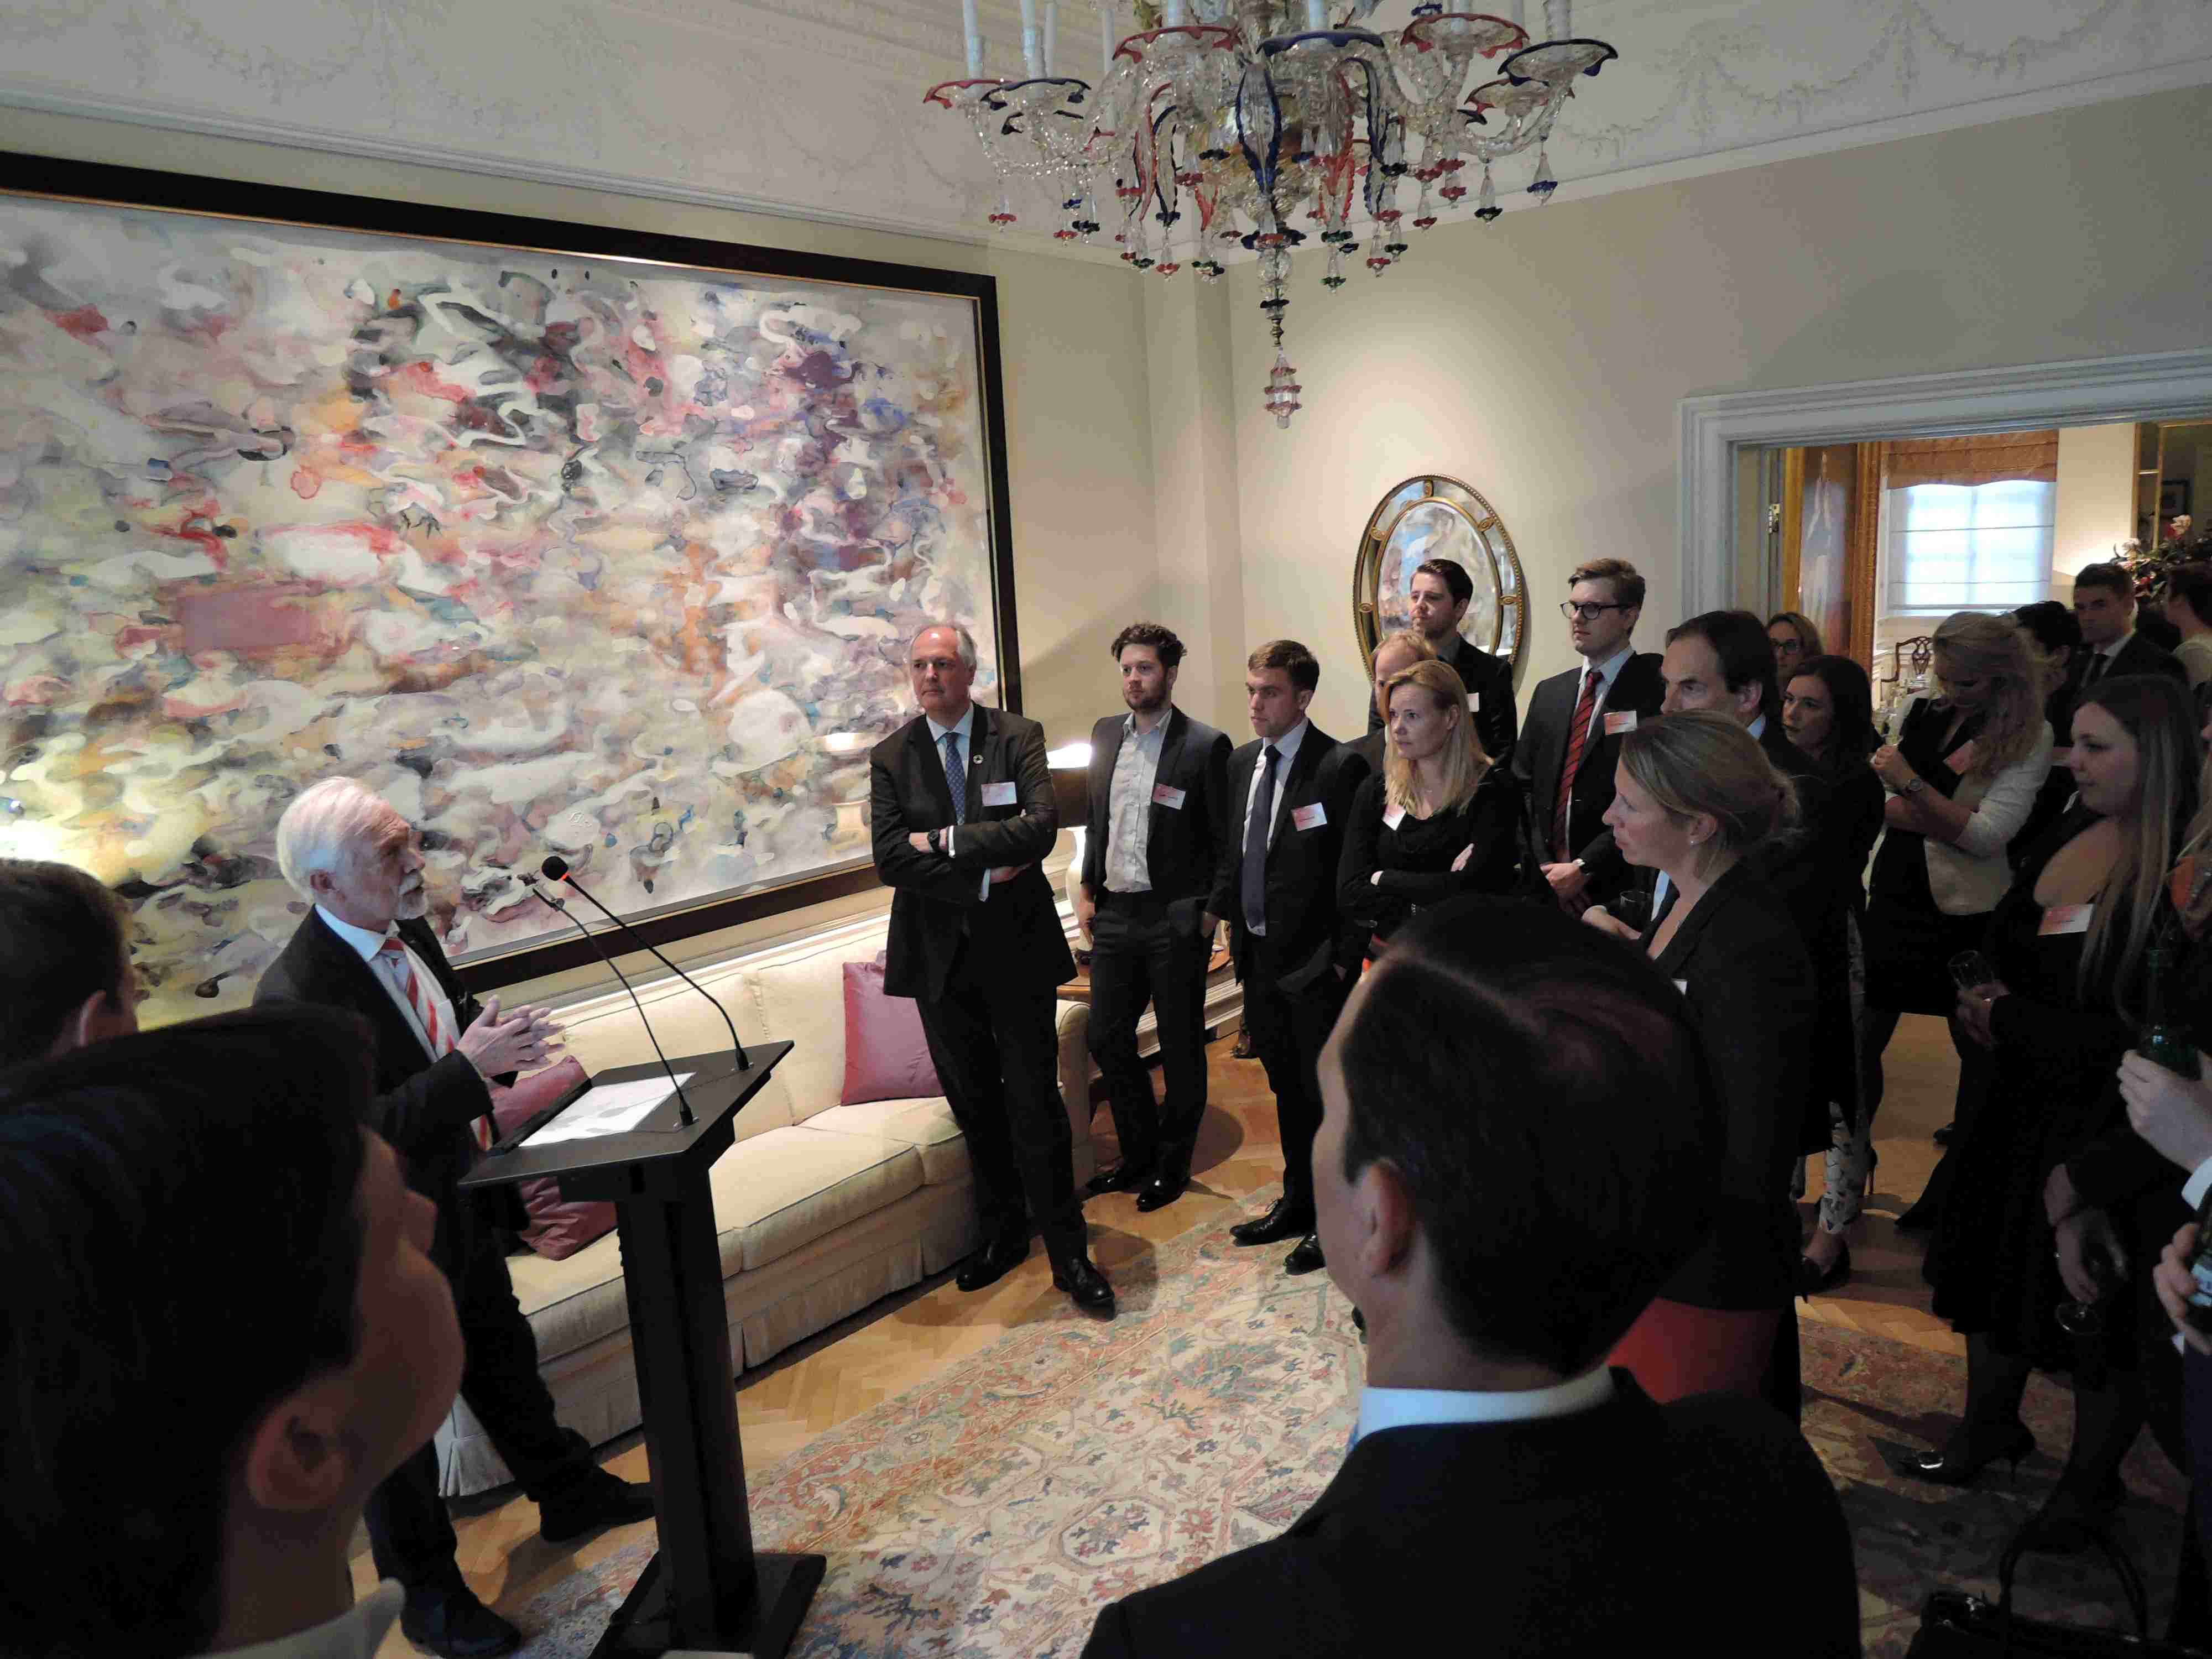 Launch event at the residence of the Dutch ambassador, 18 April 2017